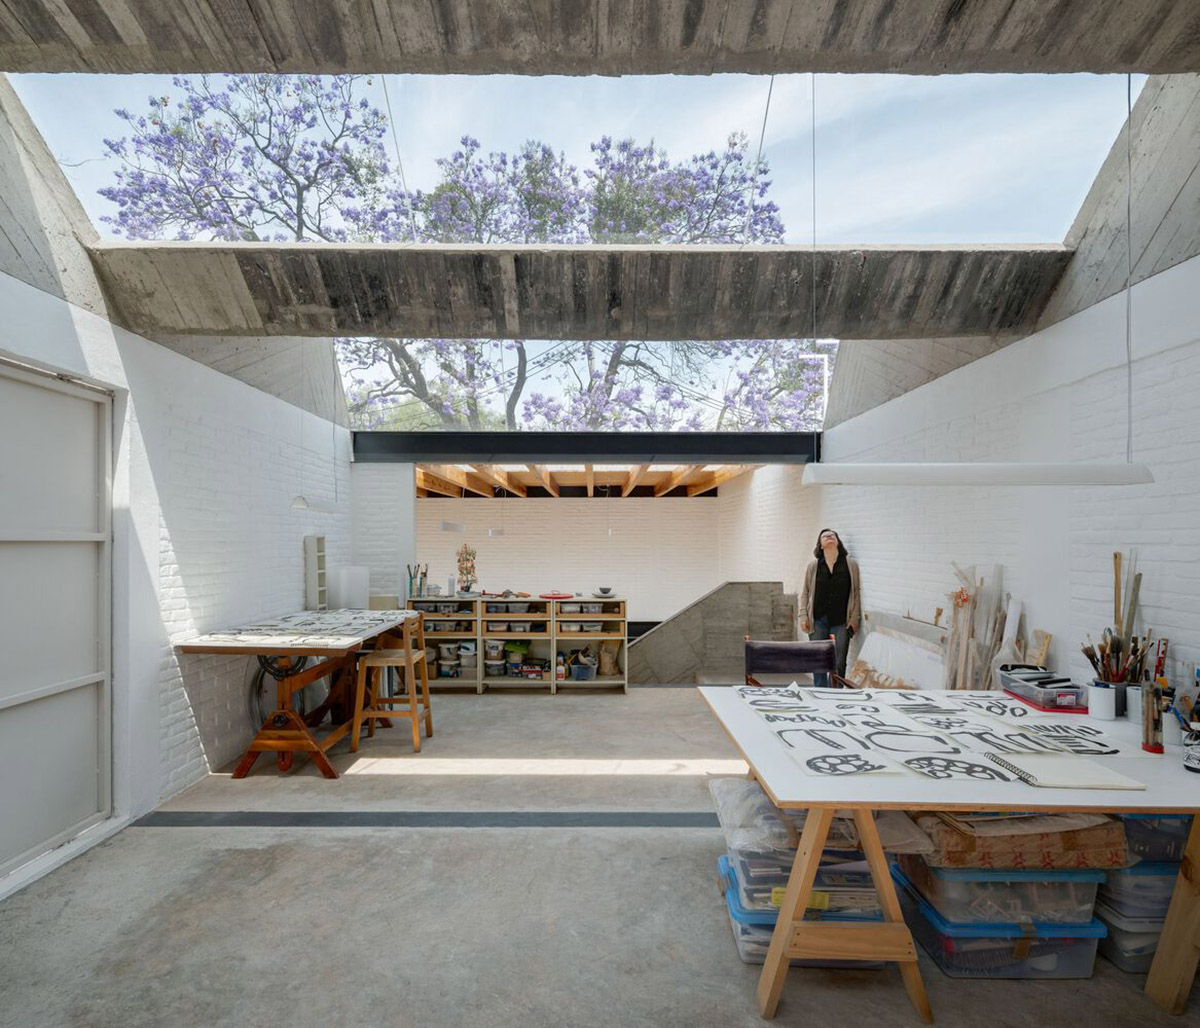 Sculptor's home studio features industrial saw-tooth roofs creating  breathing interiors in Mexico